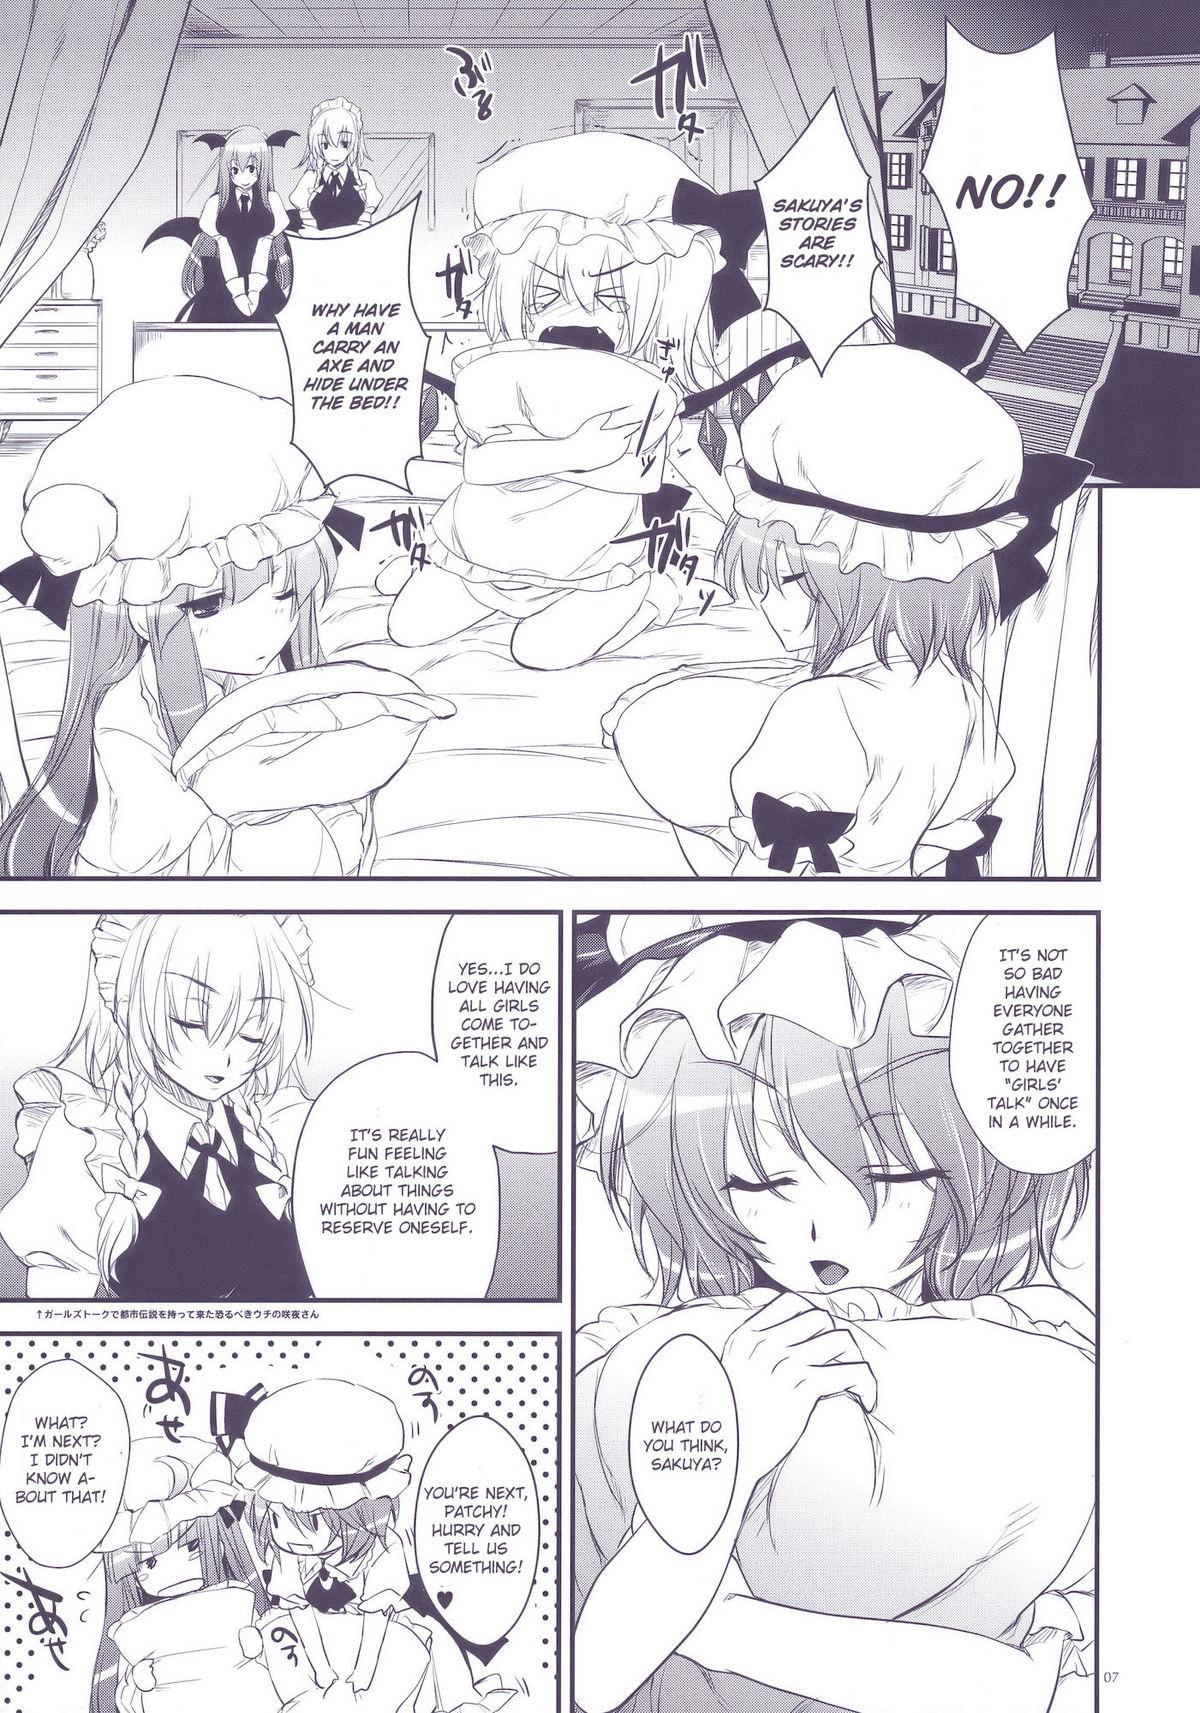 Russia GariGari 22 - Touhou project Show - Page 7